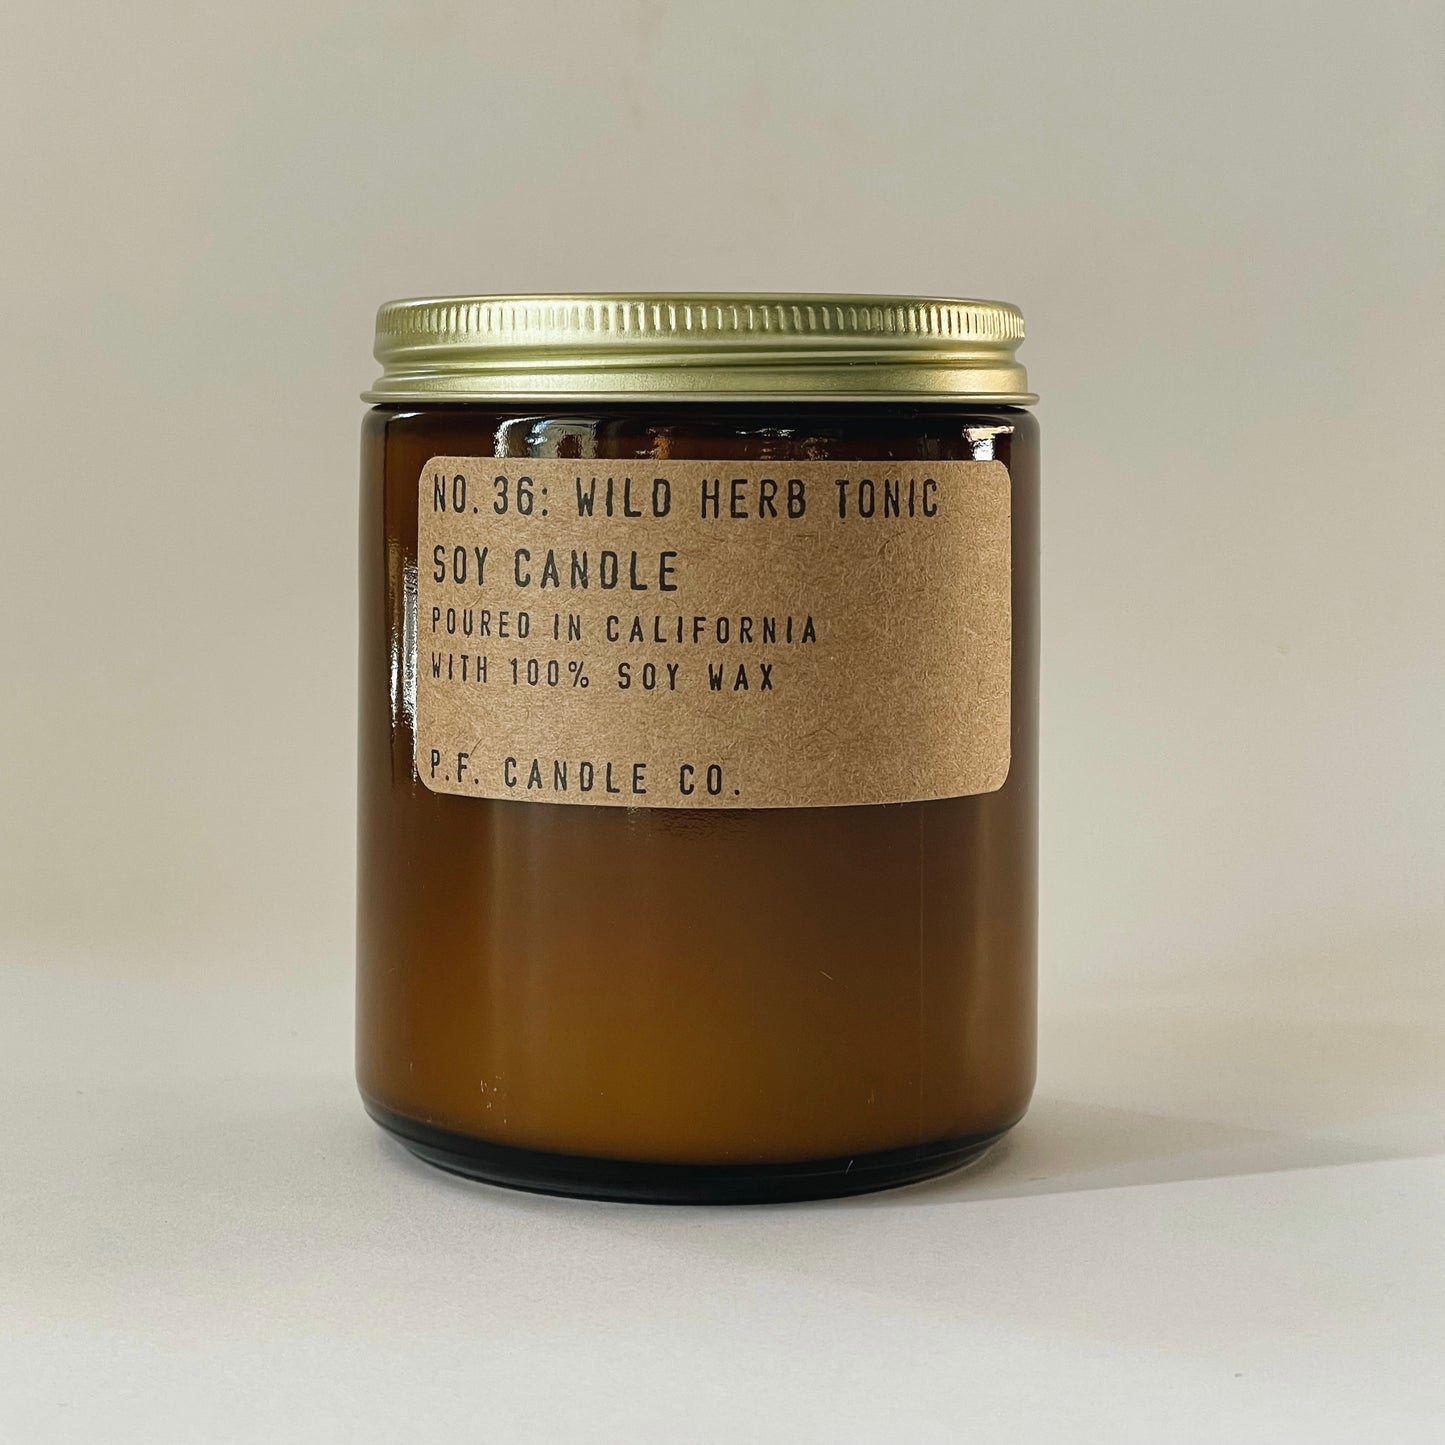 P.F. Candle Co. Soy Candle | Wild Herb Tonic